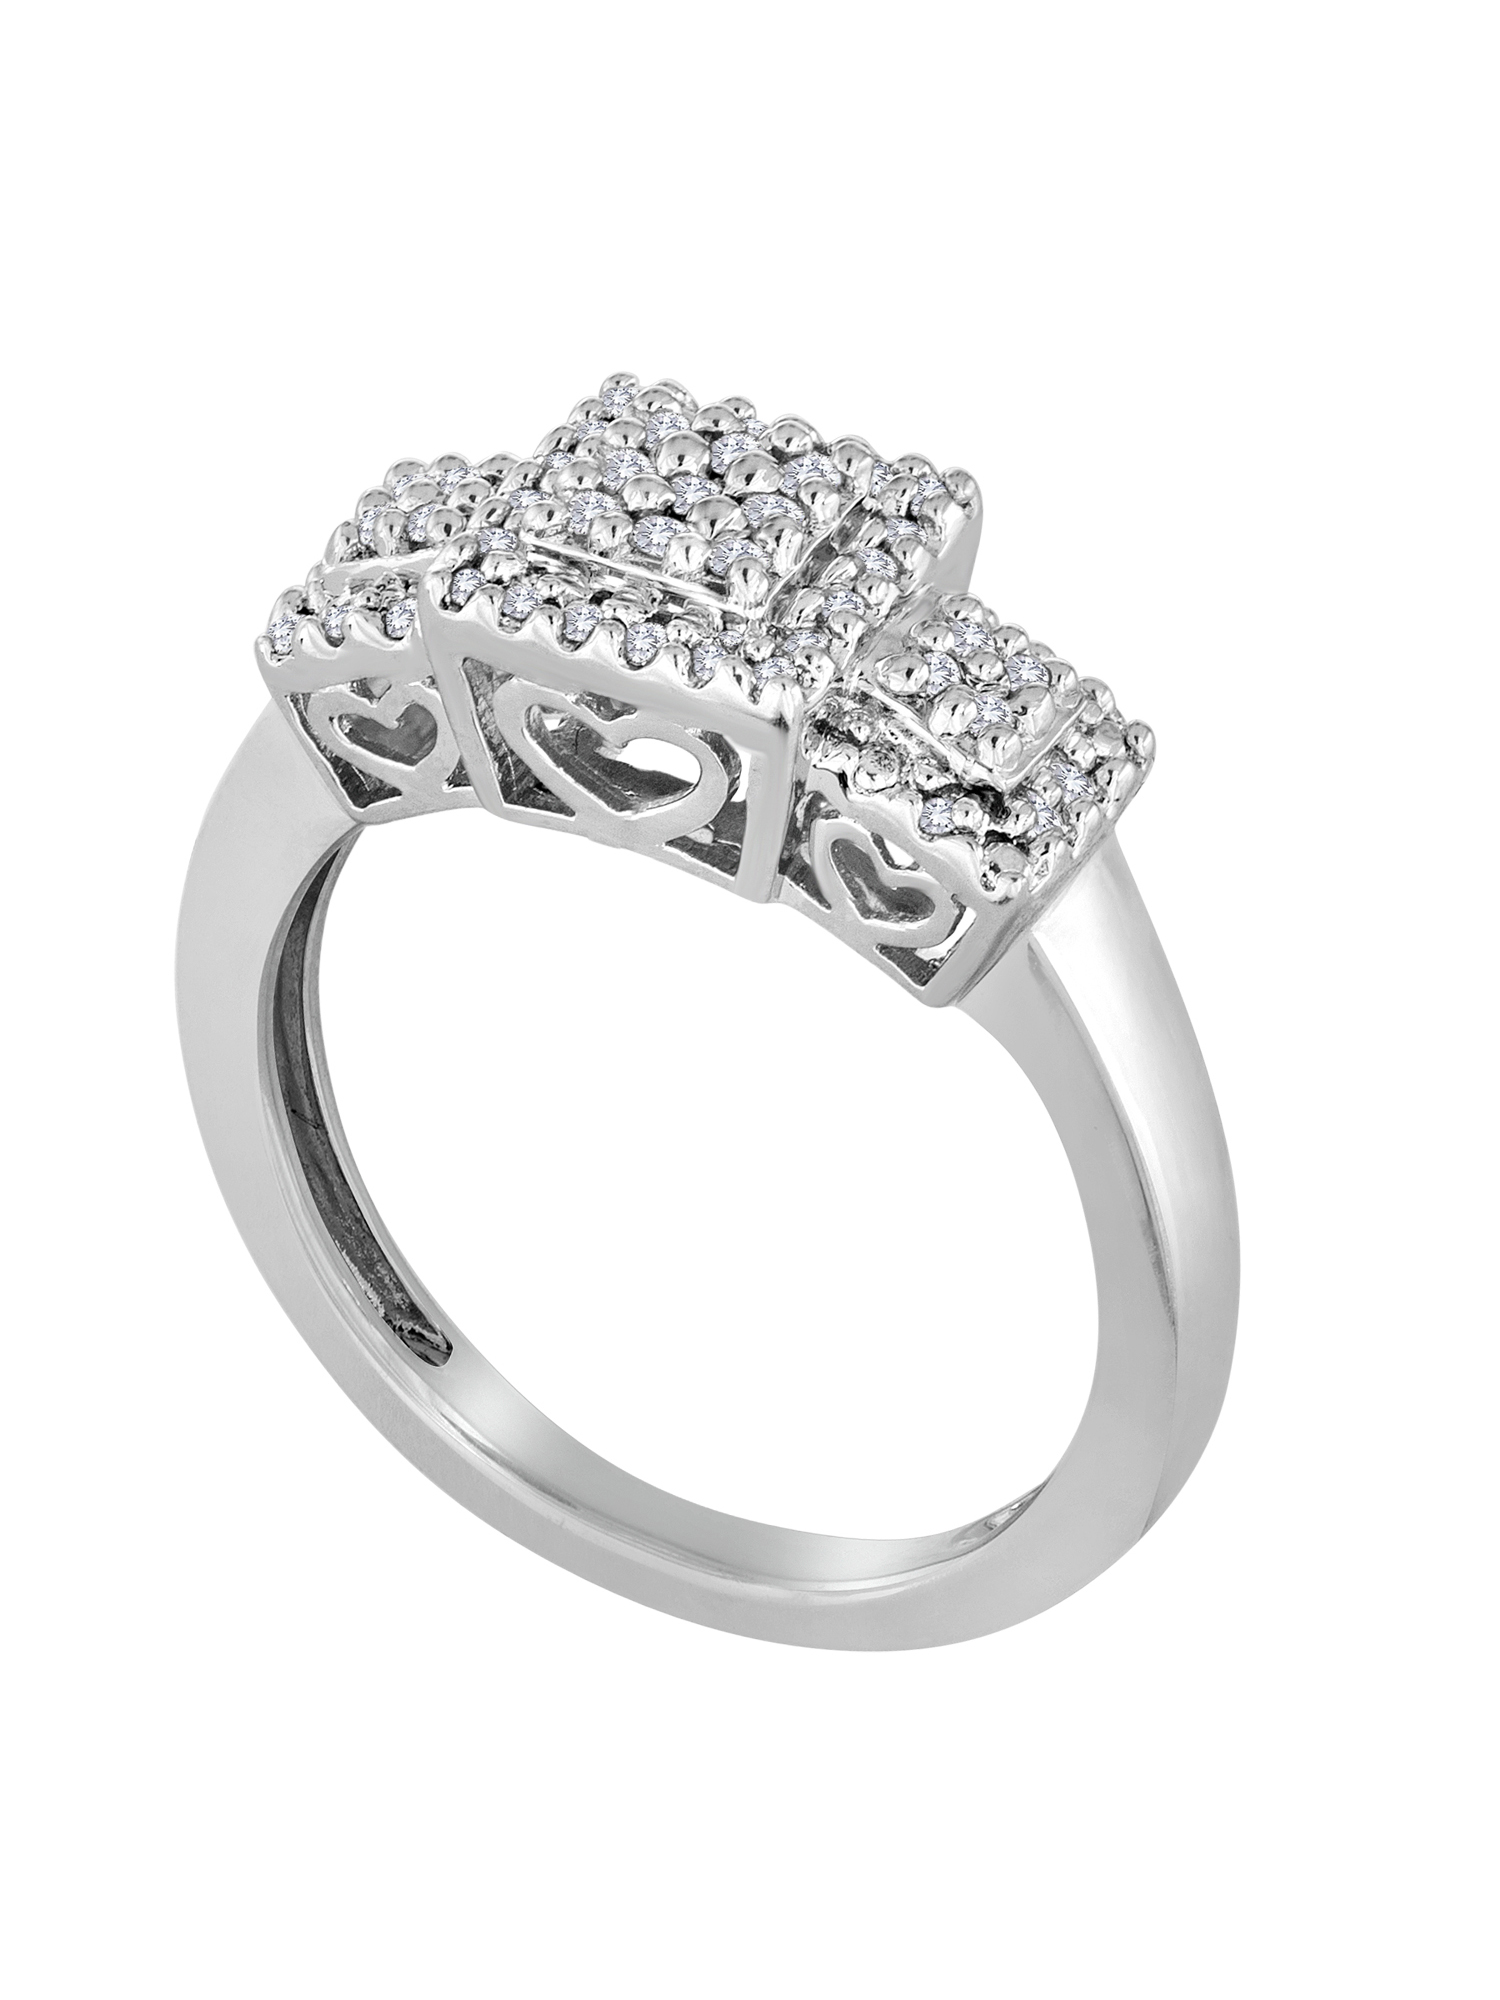 1/6 Carat T.W. Diamond Sterling Silver 3-Station Ring - image 2 of 3